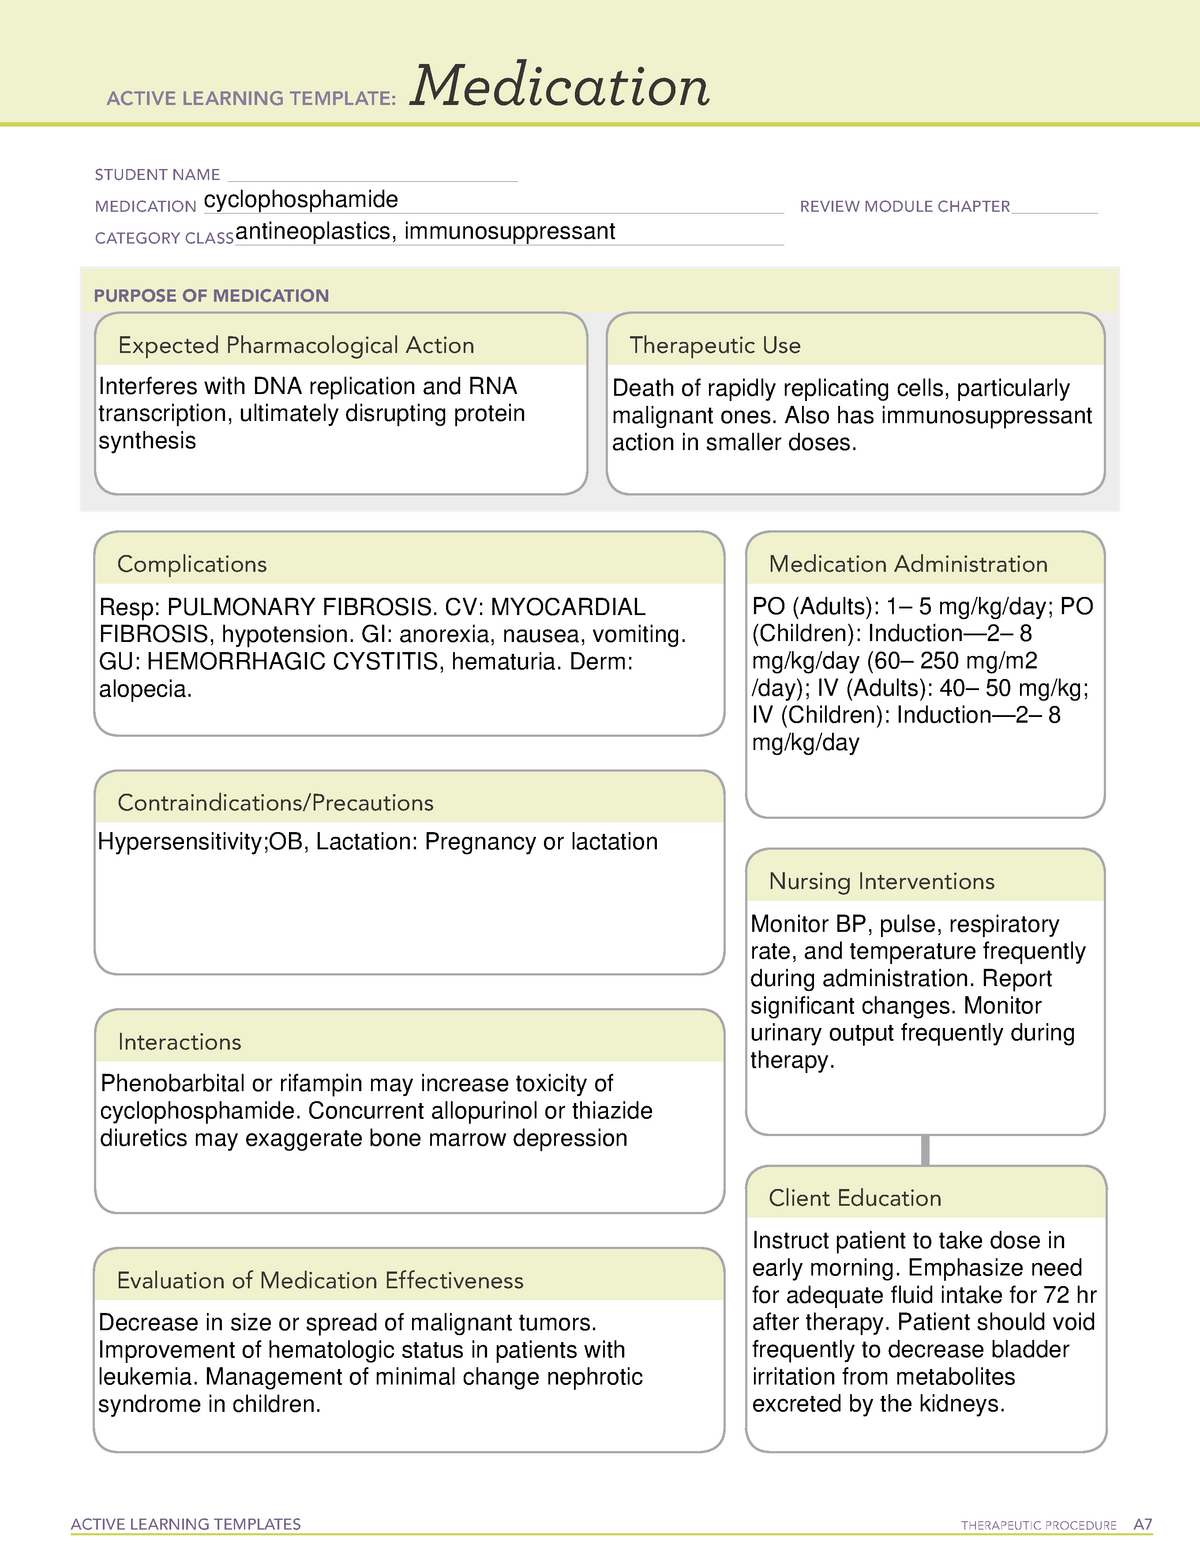 Cyclophosphamide Medication ACTIVE LEARNING TEMPLATES THERAPEUTIC